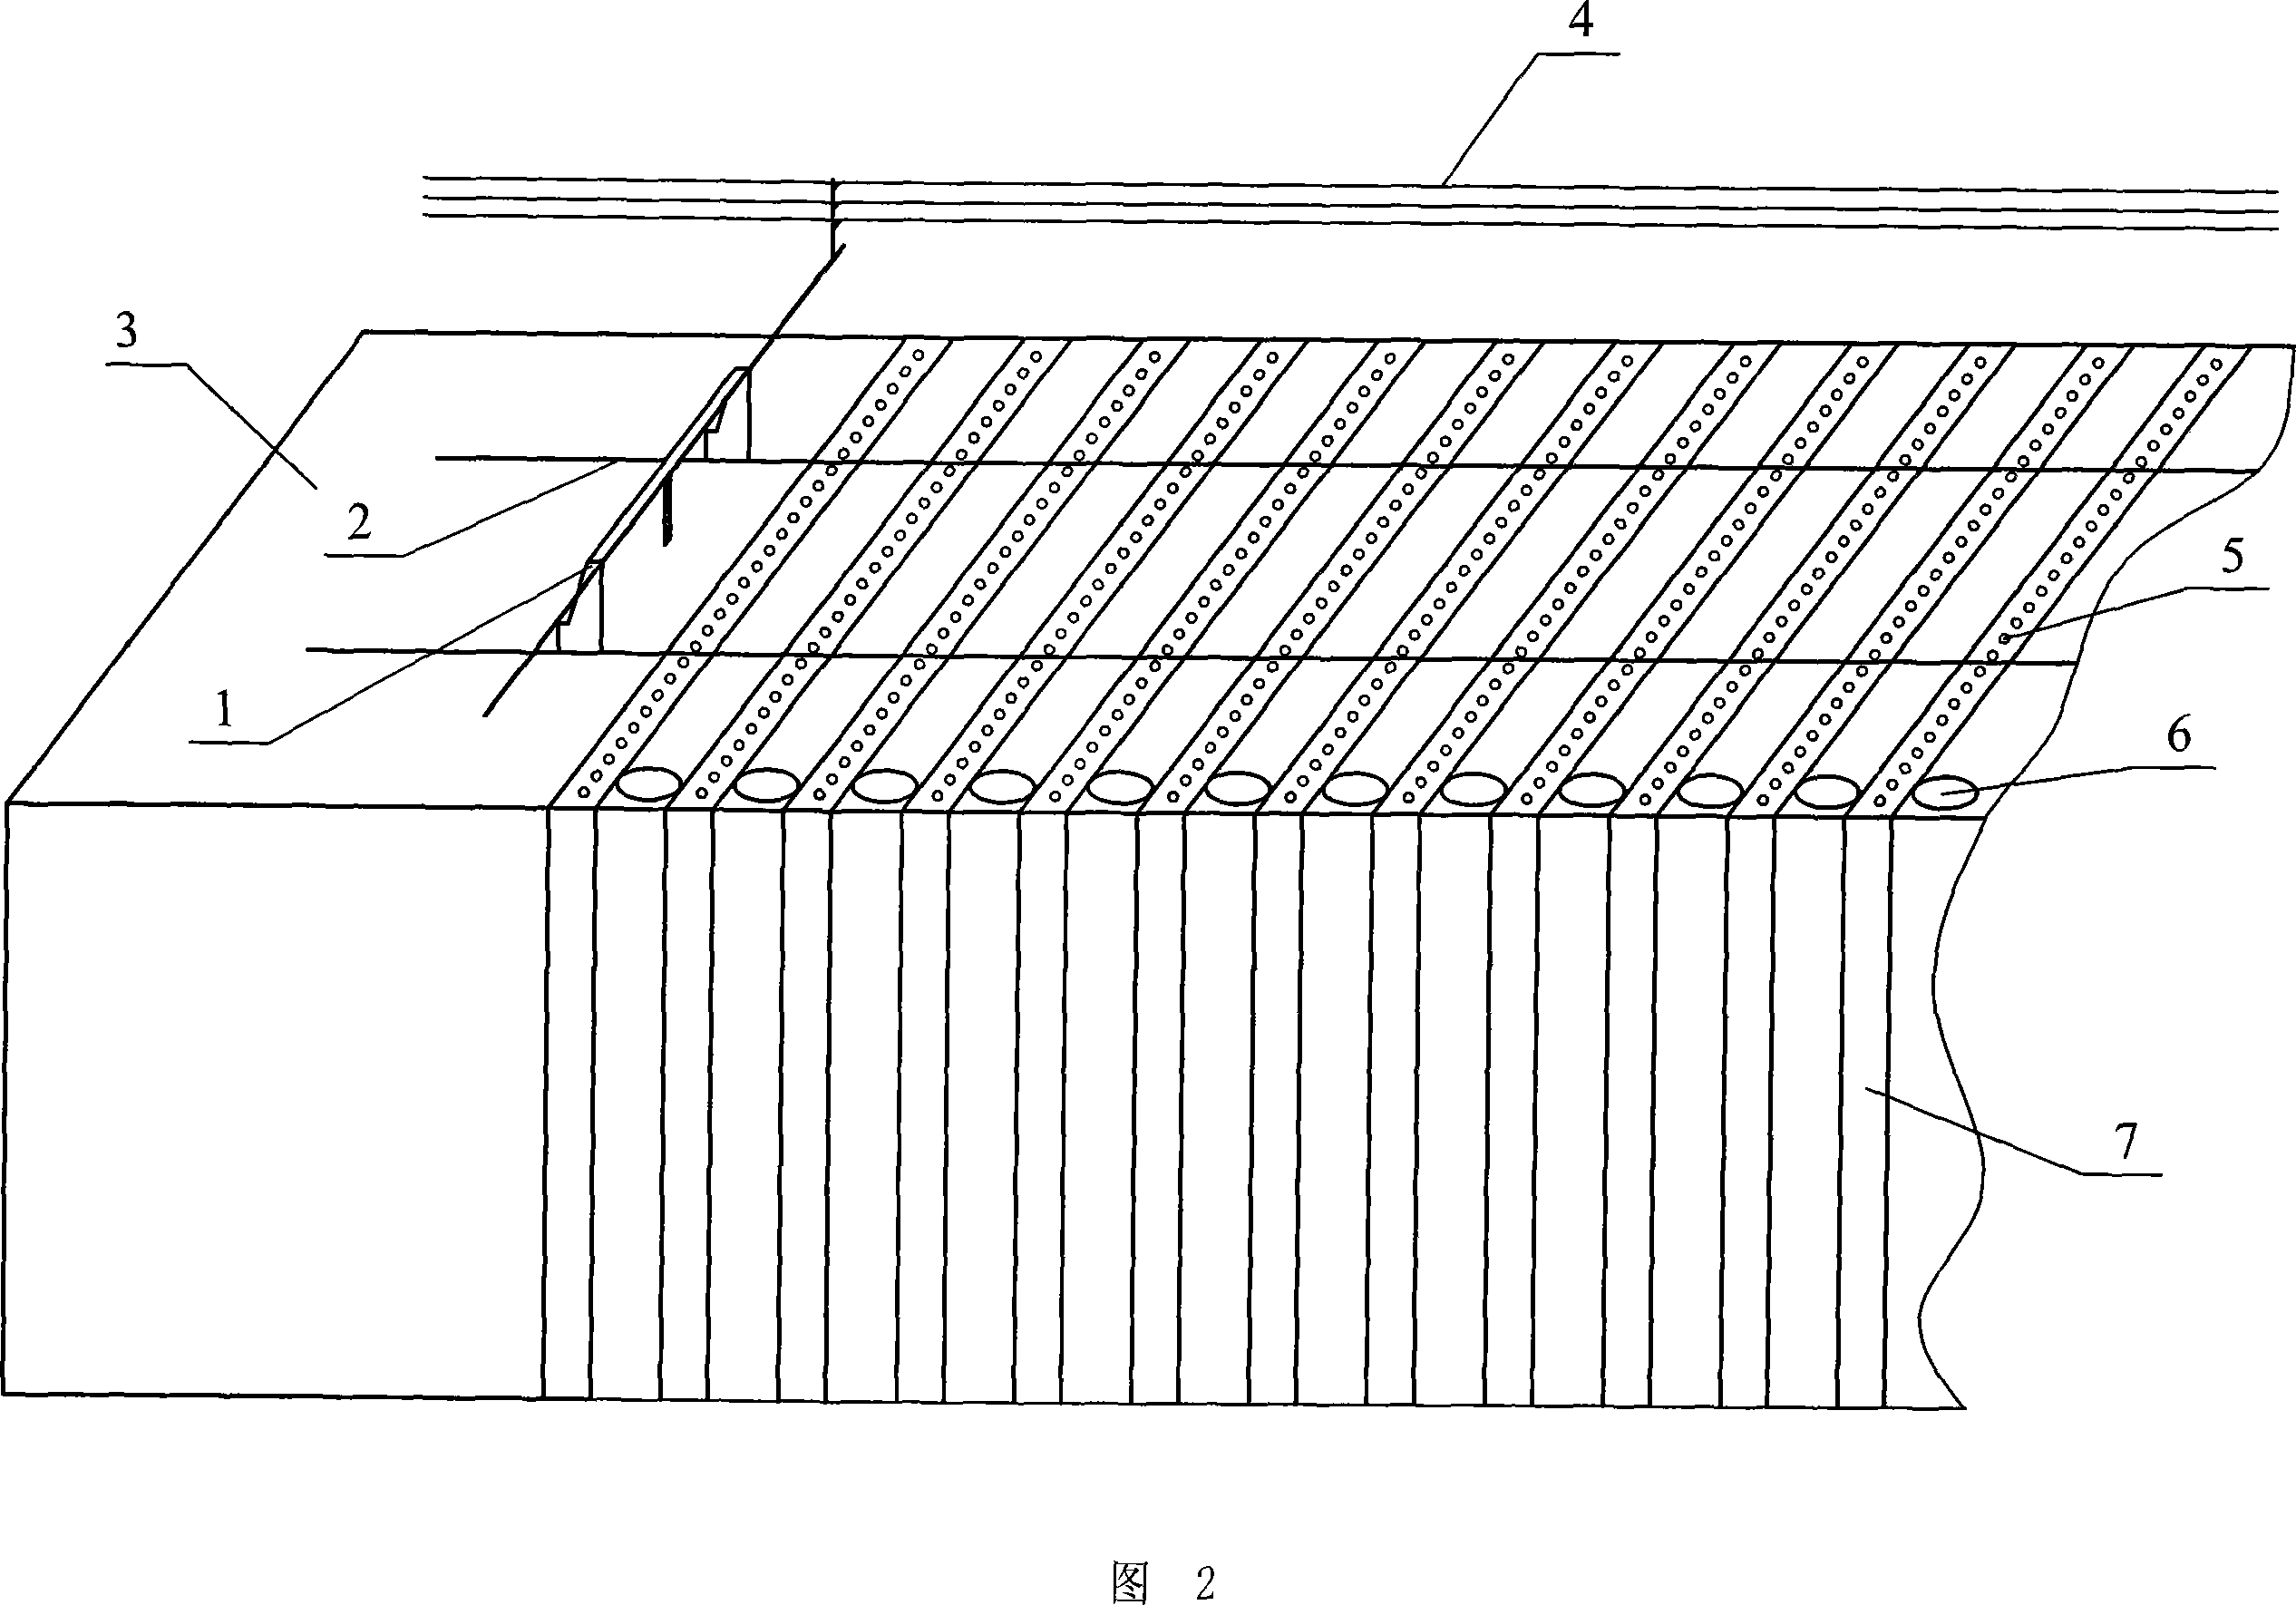 Coke oven combustion chamber temperature metering system and metering method